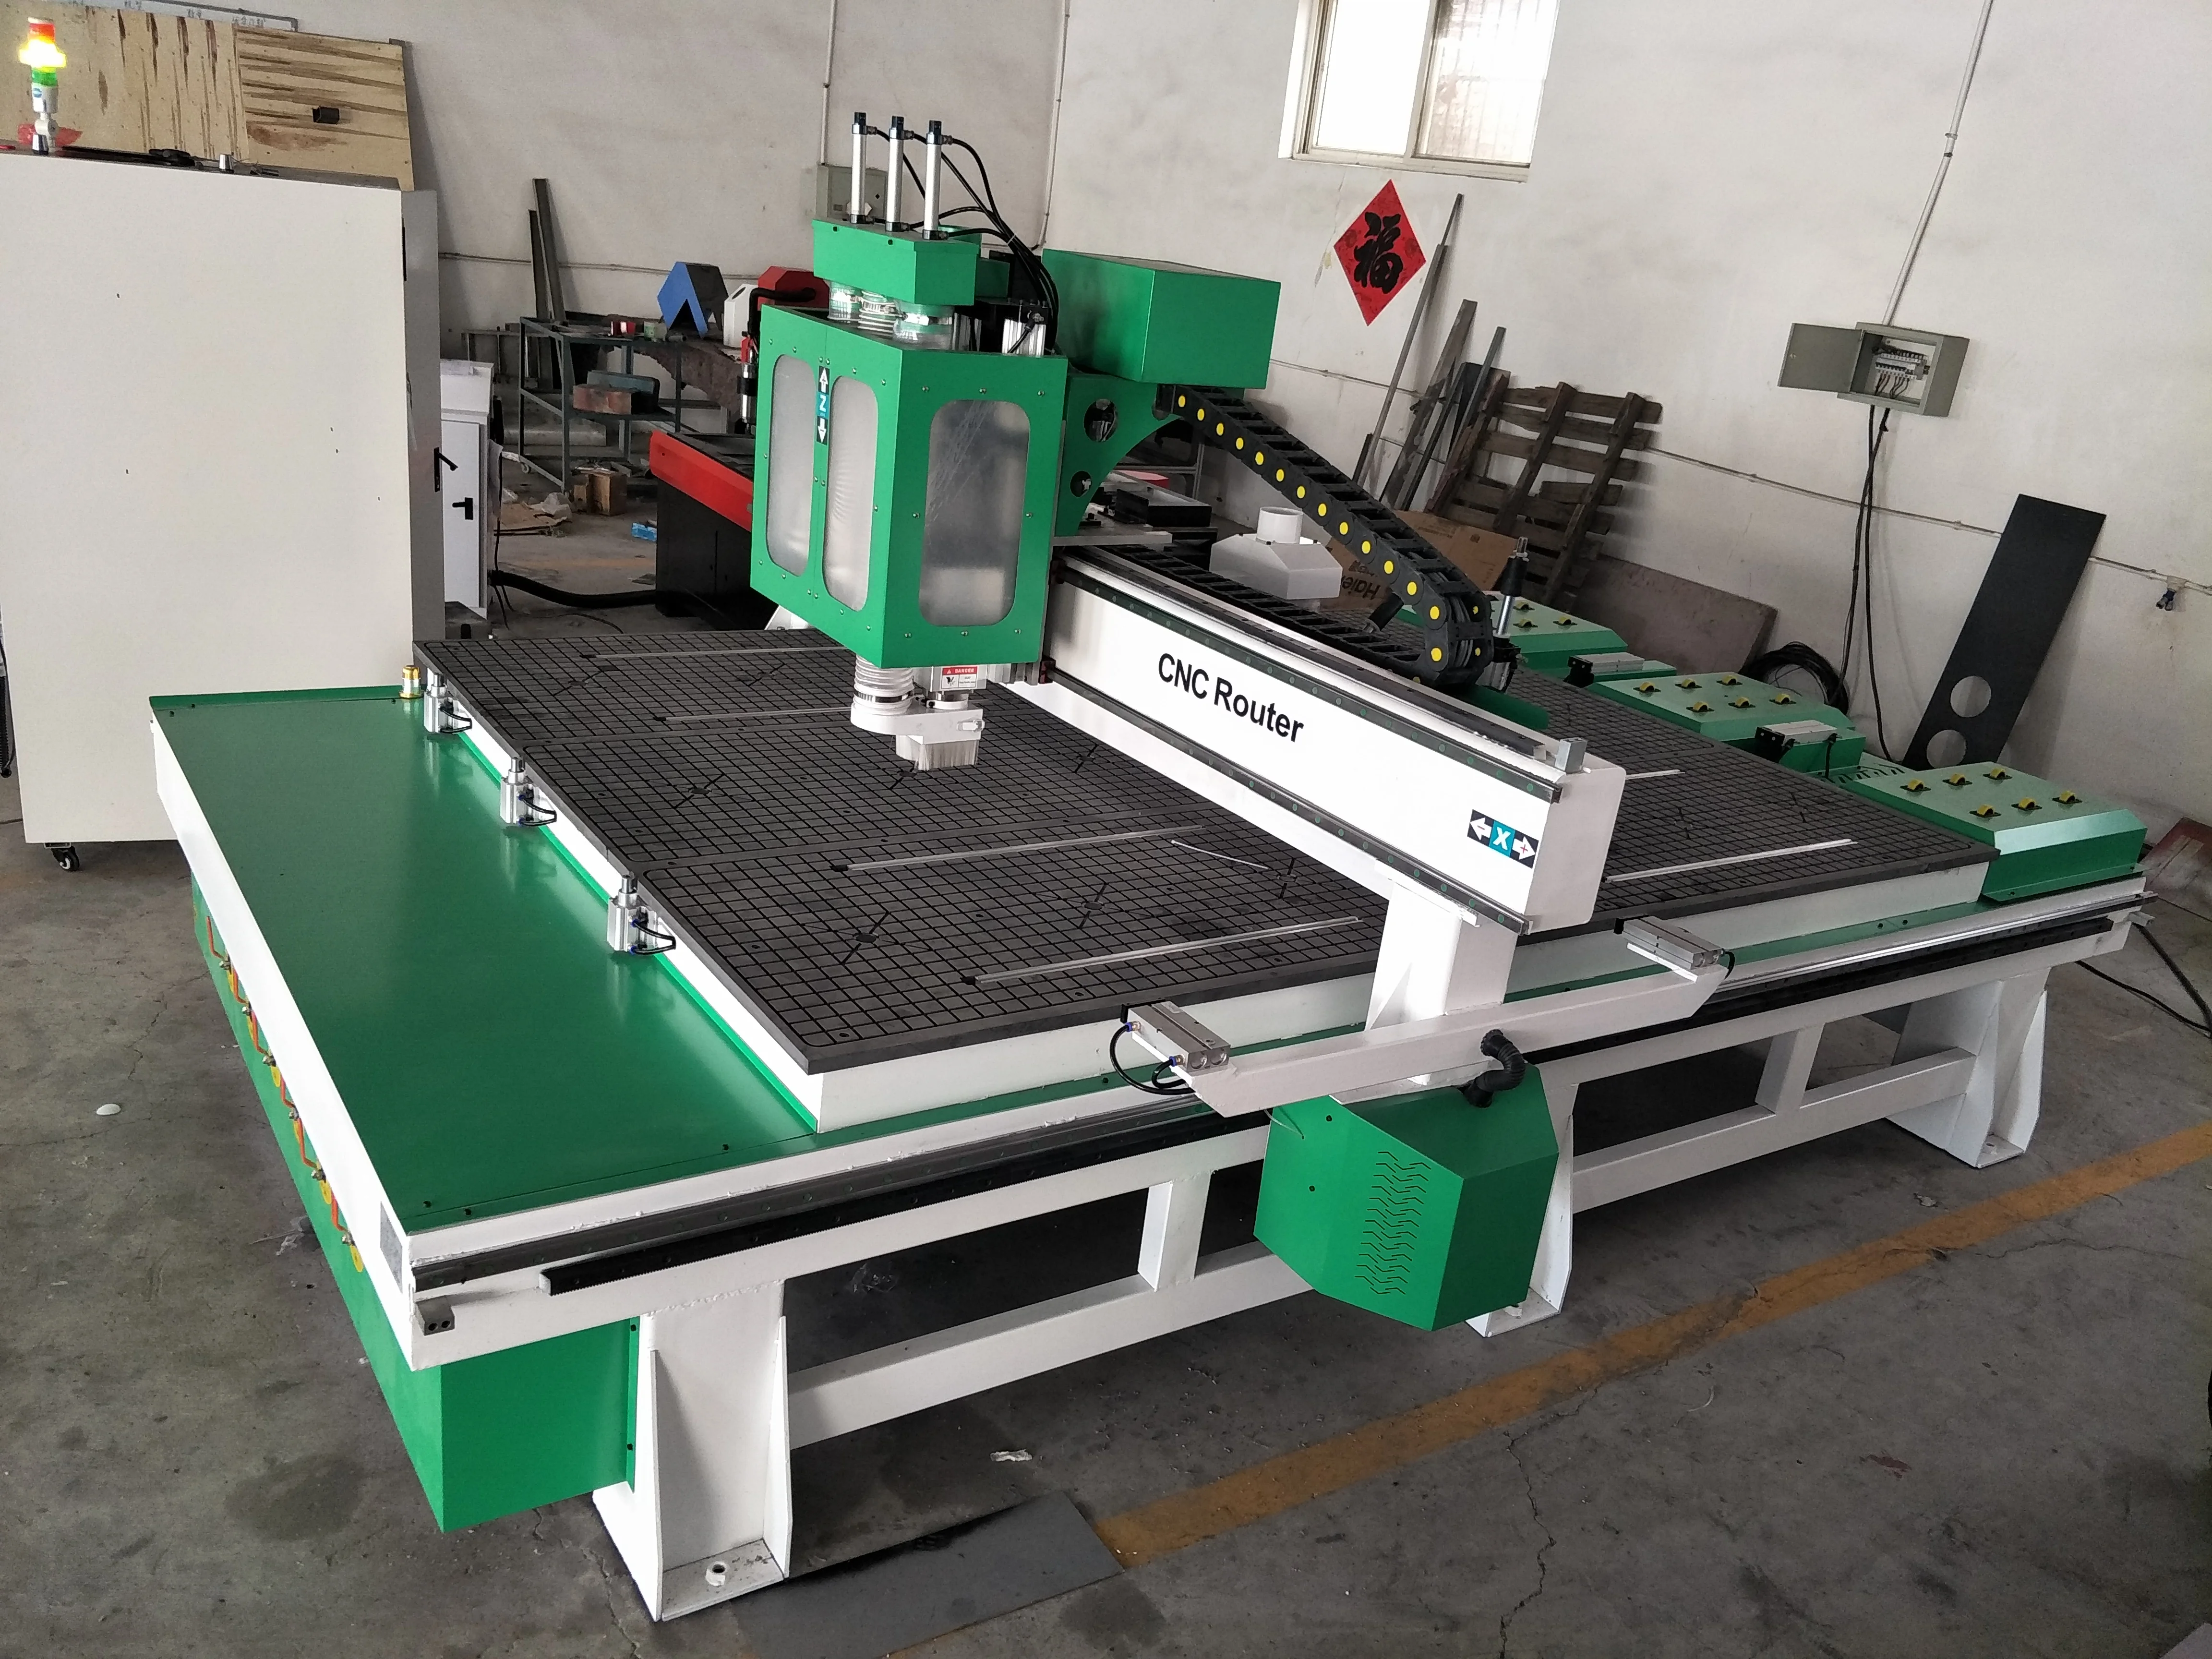 

ROBOTEC New product European design ATC CNC Router Companies with agents cnc router machine woodworking cnc router 7x10 feet